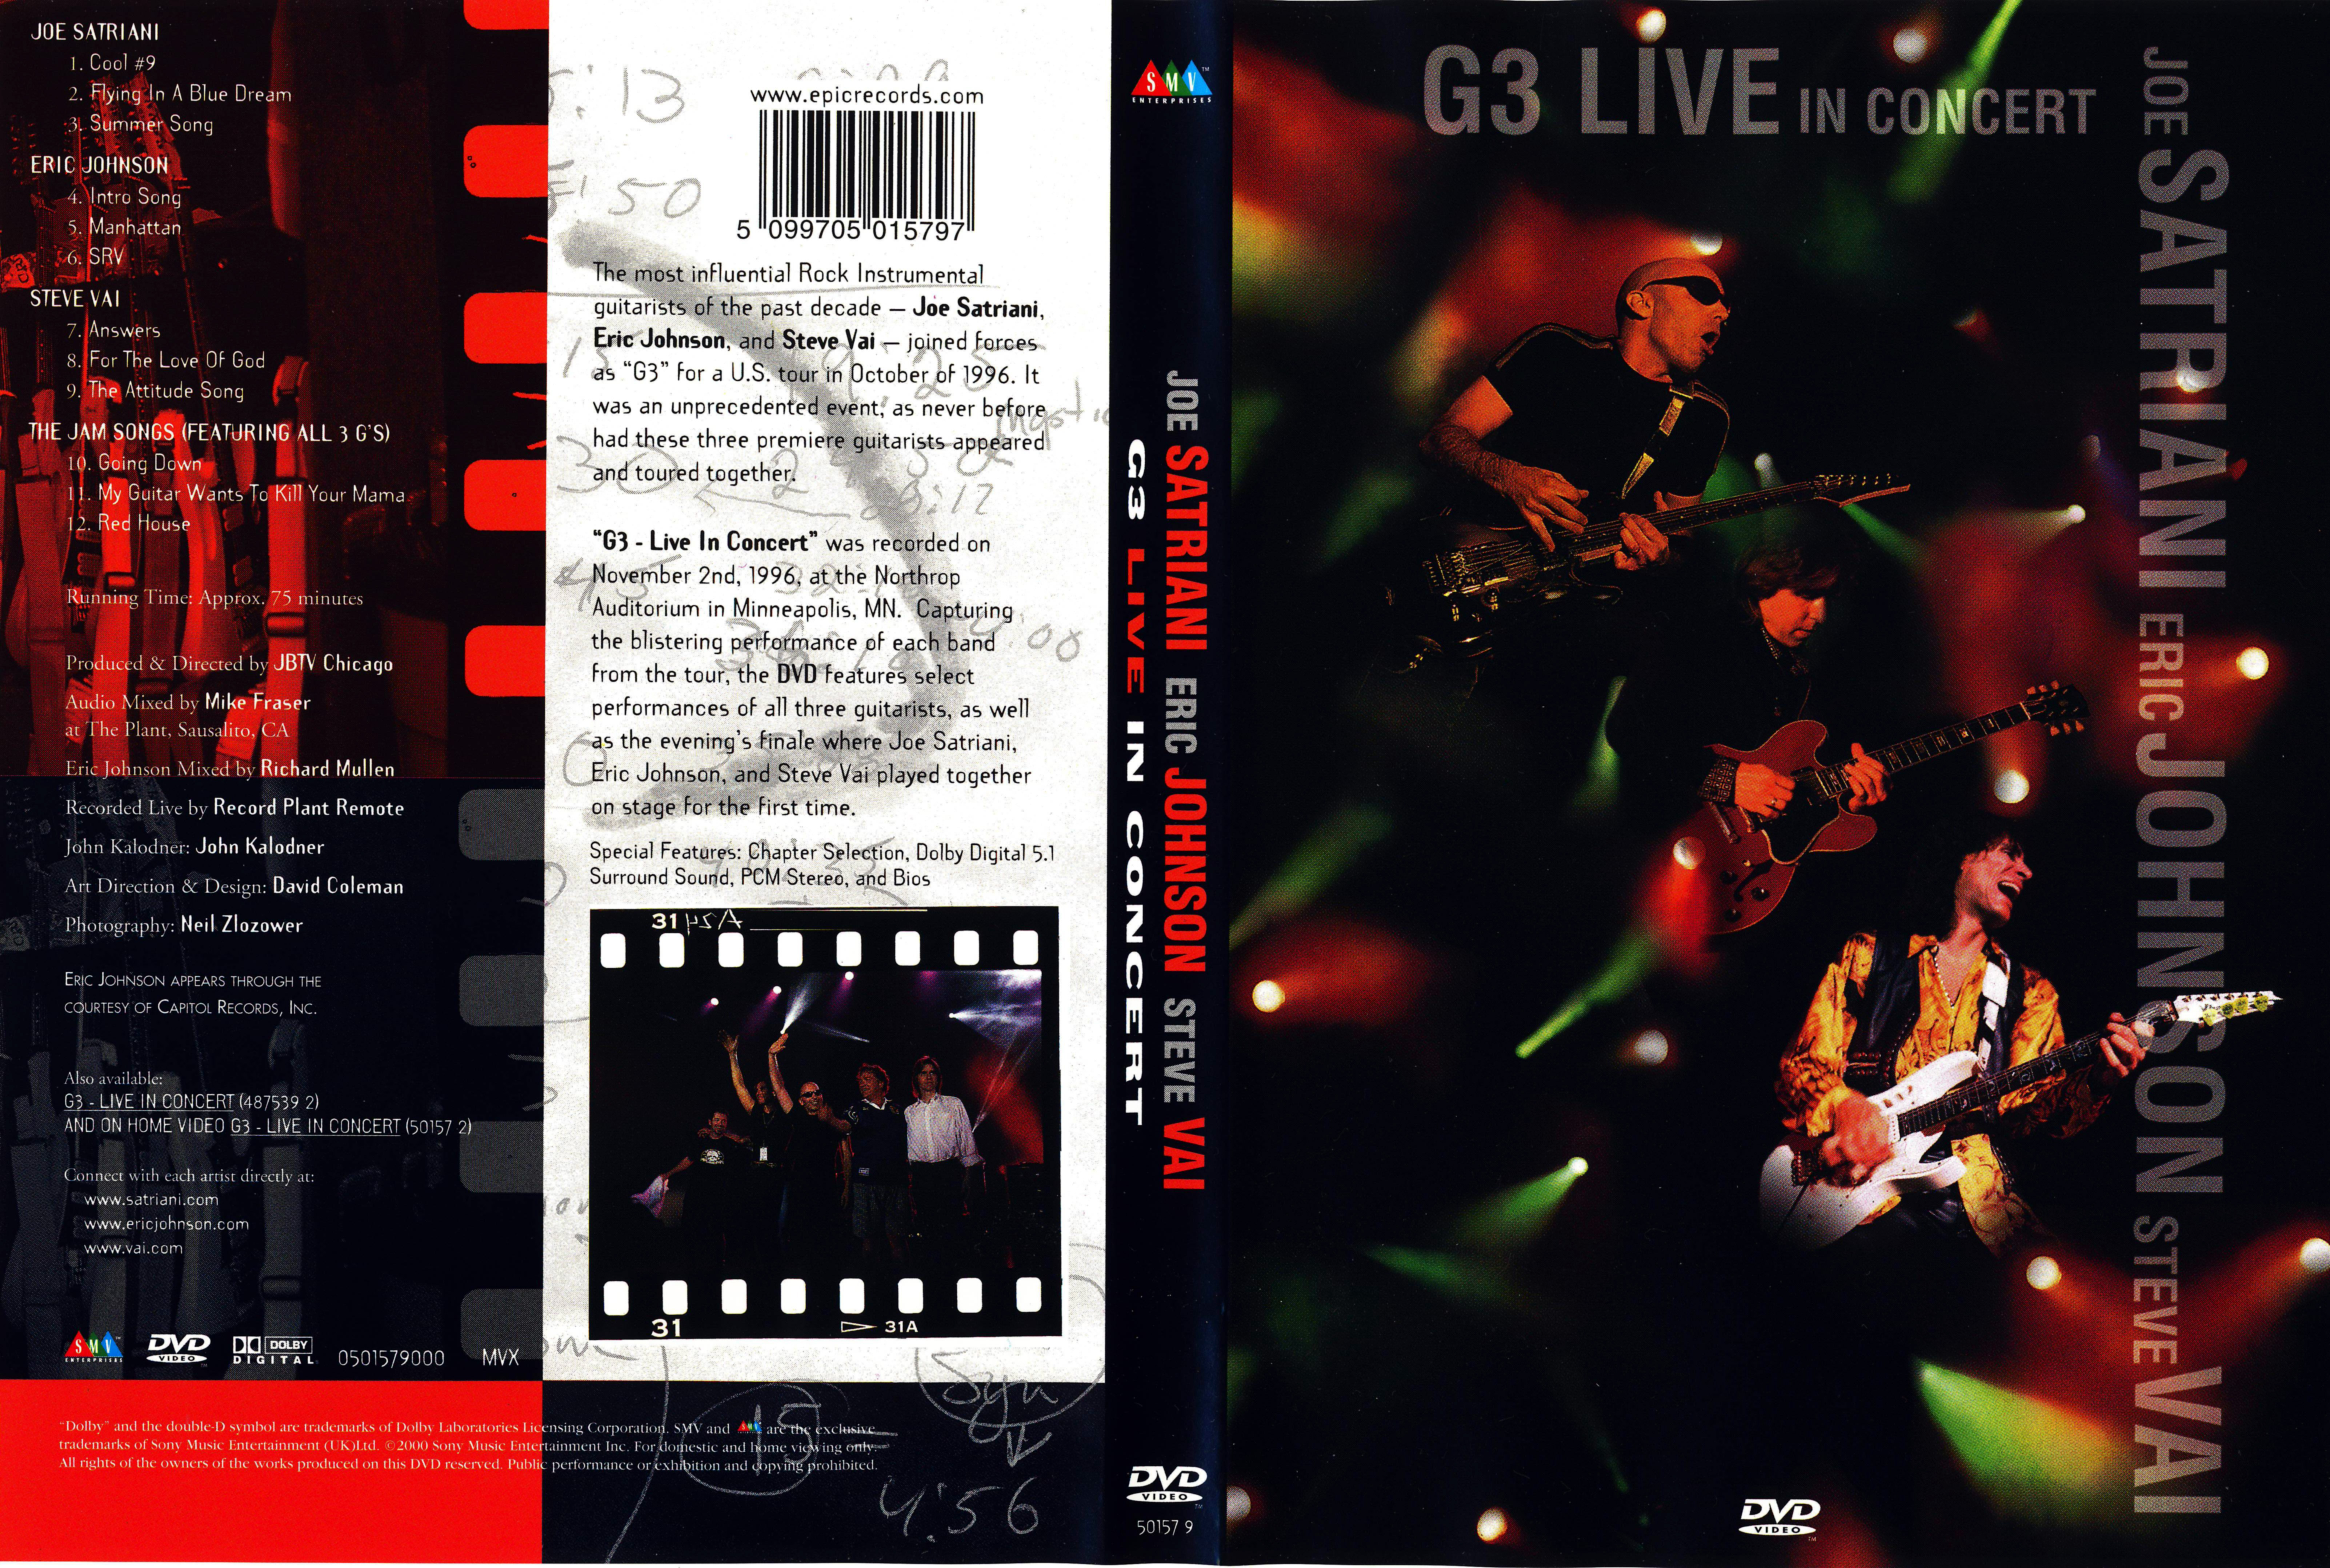 Jaquette DVD G3 Live in concert